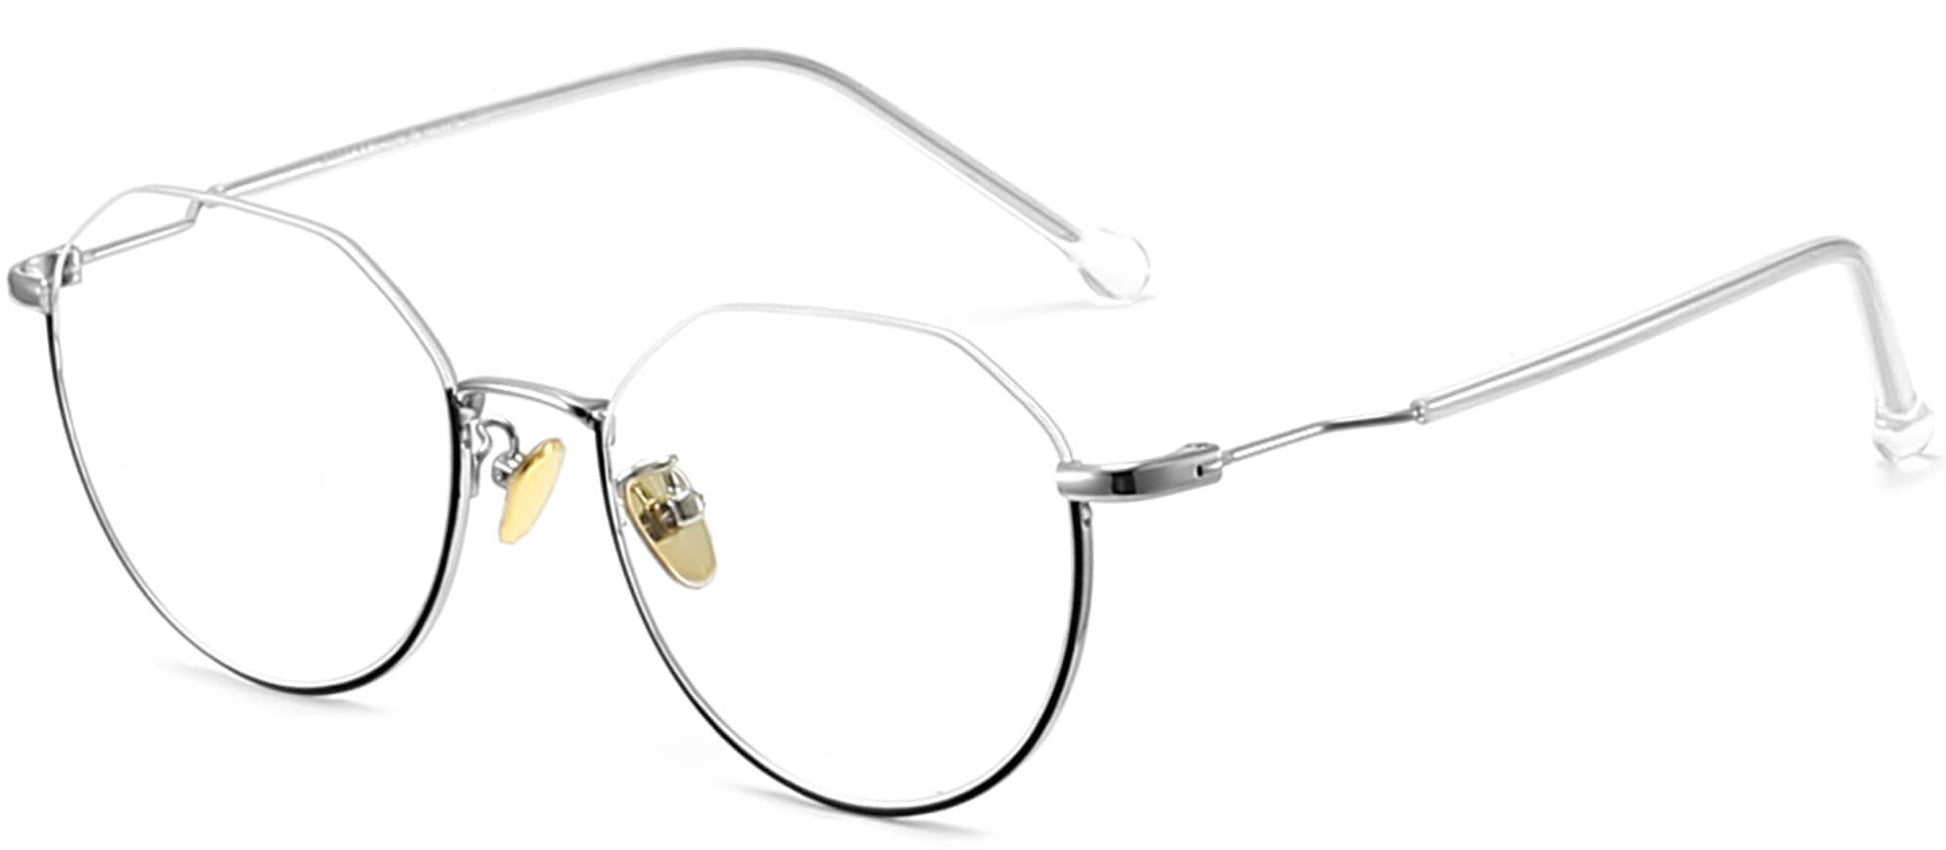 Russell Geometric Black Eyeglasses from ANRRI, angle view